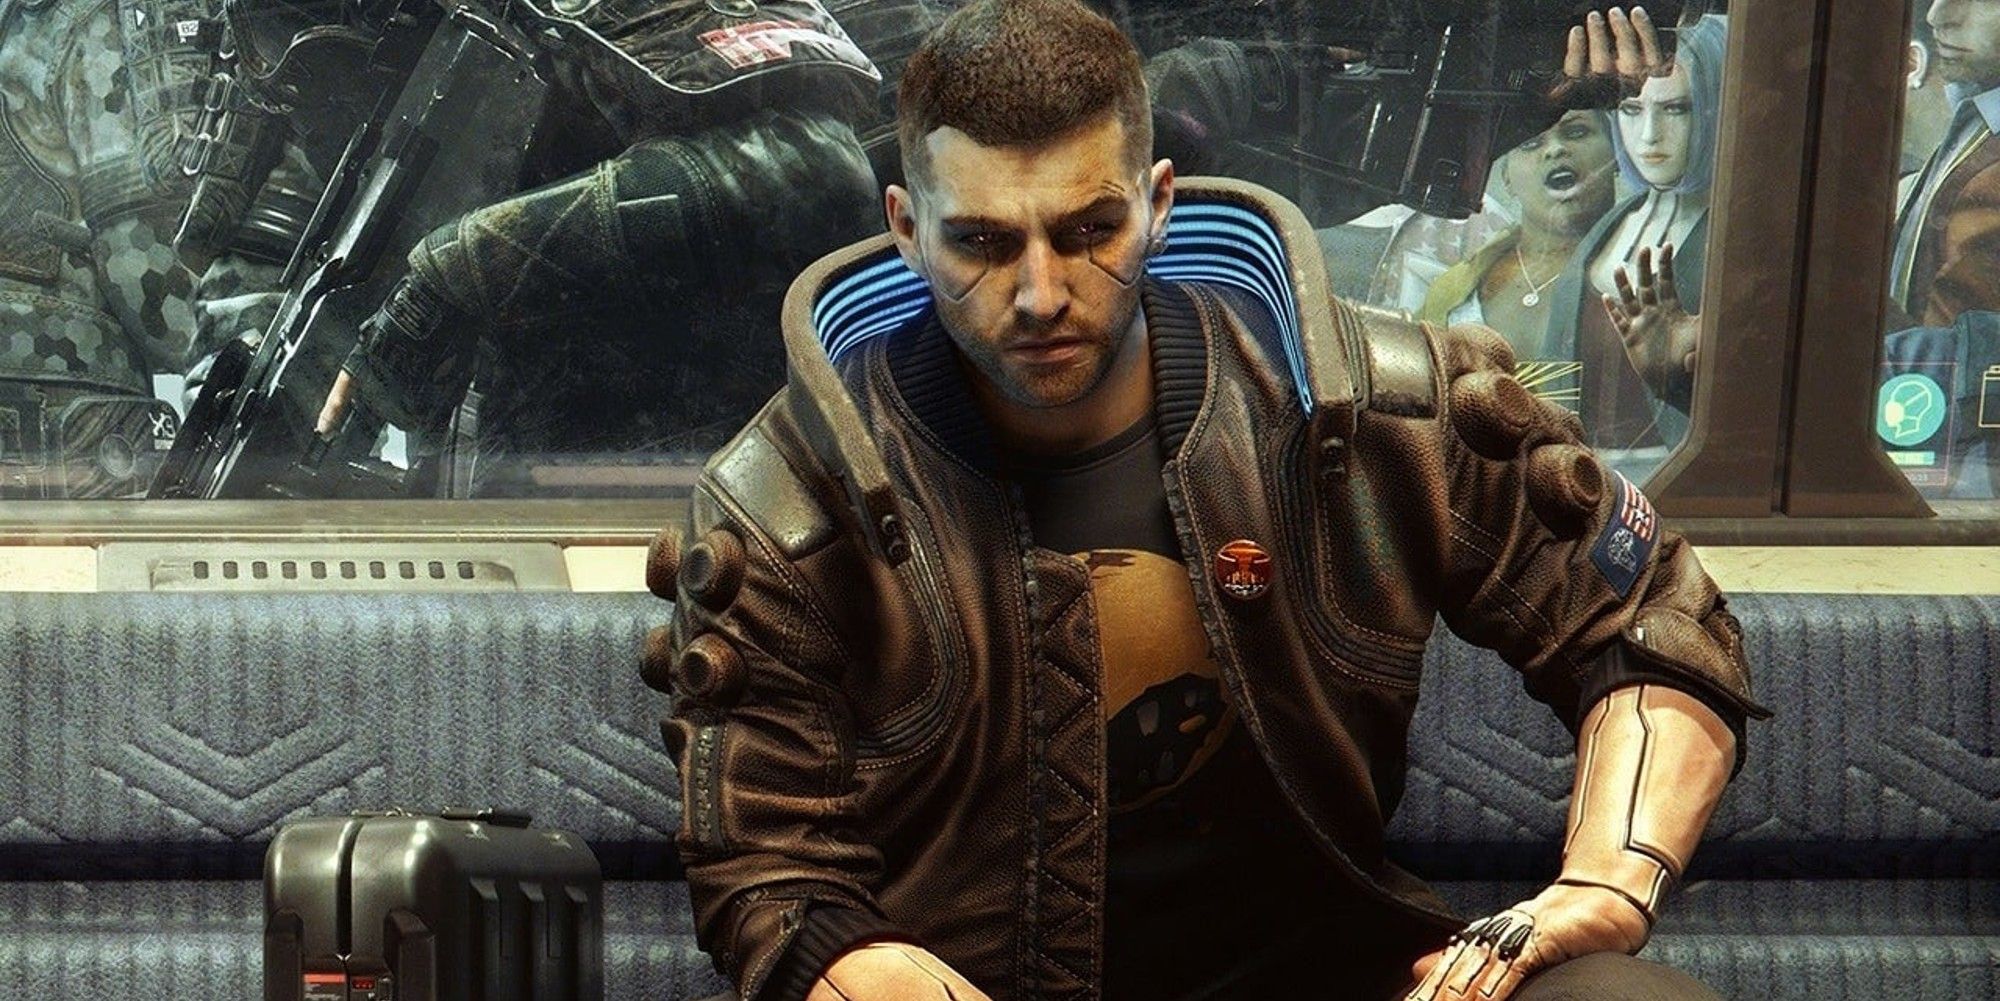 cyberpunk character 2077 was sitting on the subway